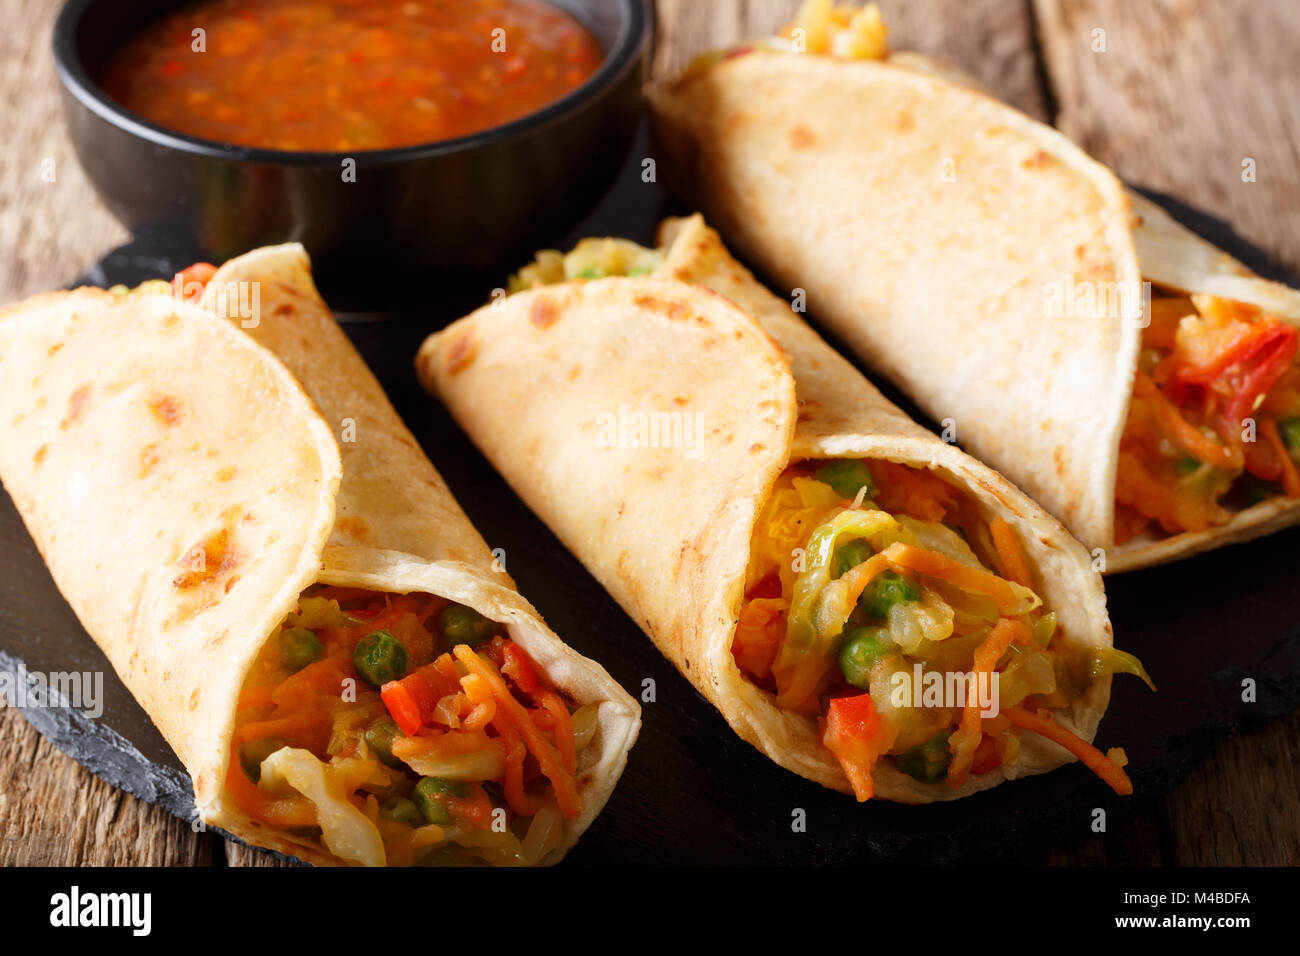 Indian street vegetarian food: Franky Roti roll stuffed with vegetables close-up on the table. horizontal Stock Photo